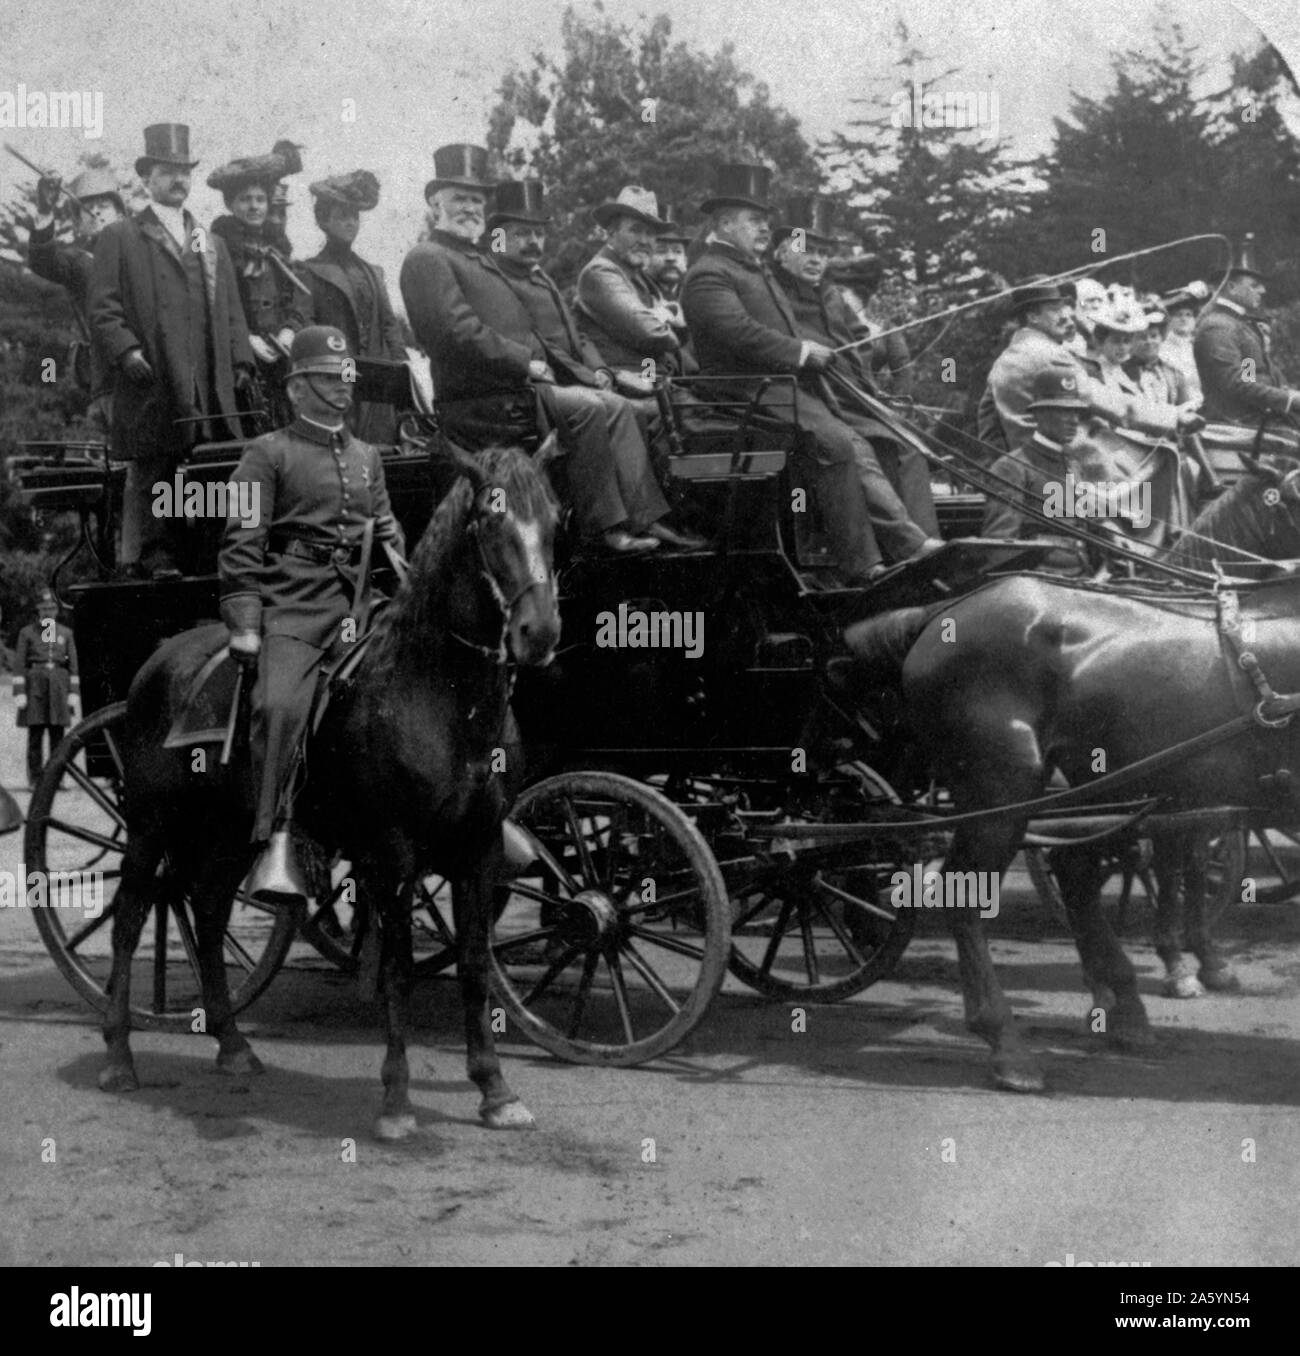 Presidential Tally Ho Party 1901. President William McKinley at Golden Gate Park, San Francisco, California in horse-drawn carriage. Unknown Stock Photo